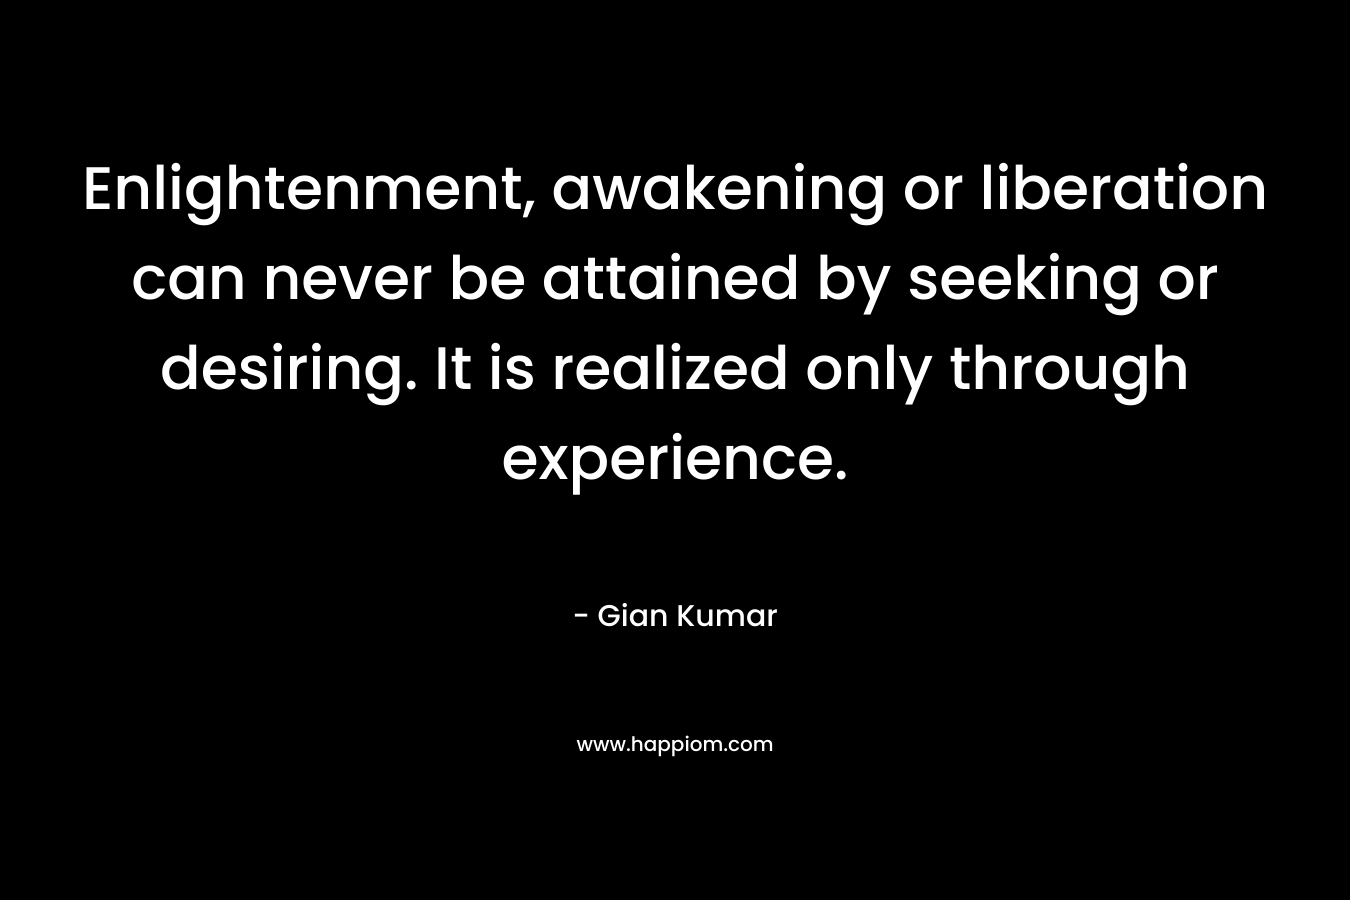 Enlightenment, awakening or liberation can never be attained by seeking or desiring. It is realized only through experience. – Gian Kumar